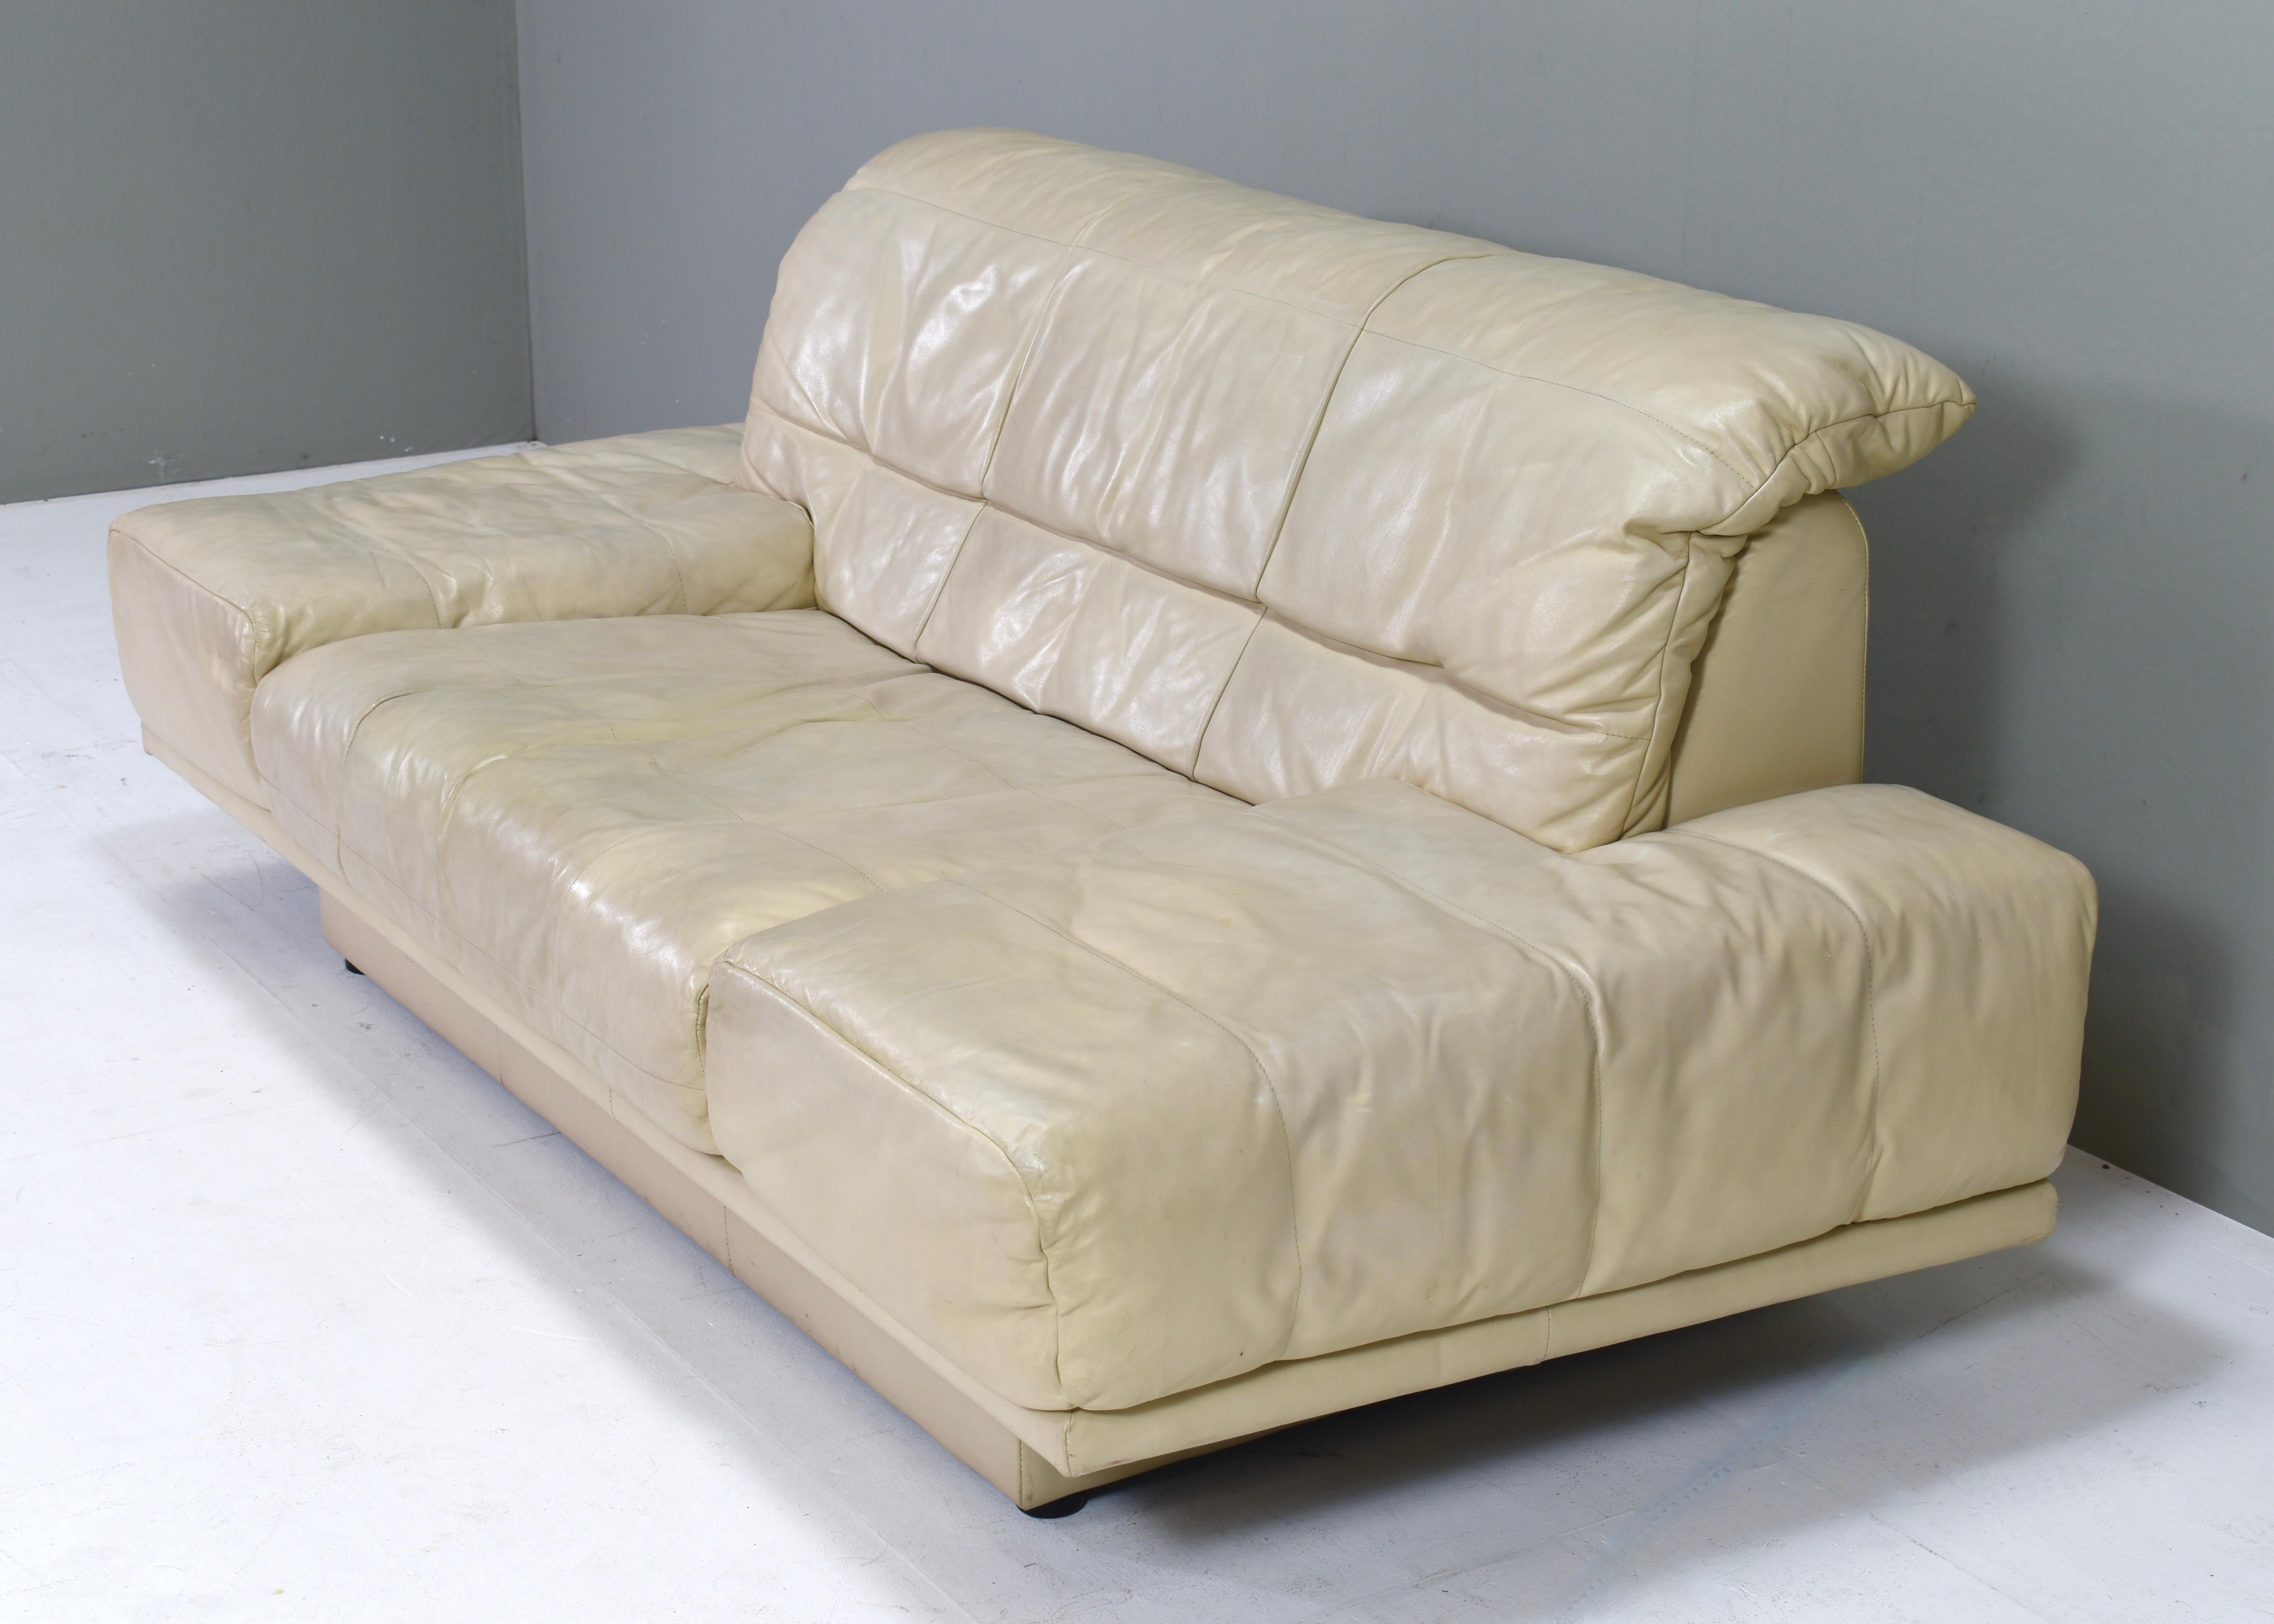 Rolf Benz 2-seat sofa in Ivory Cream White Leather – Germany, circa 1980-1990 For Sale 5